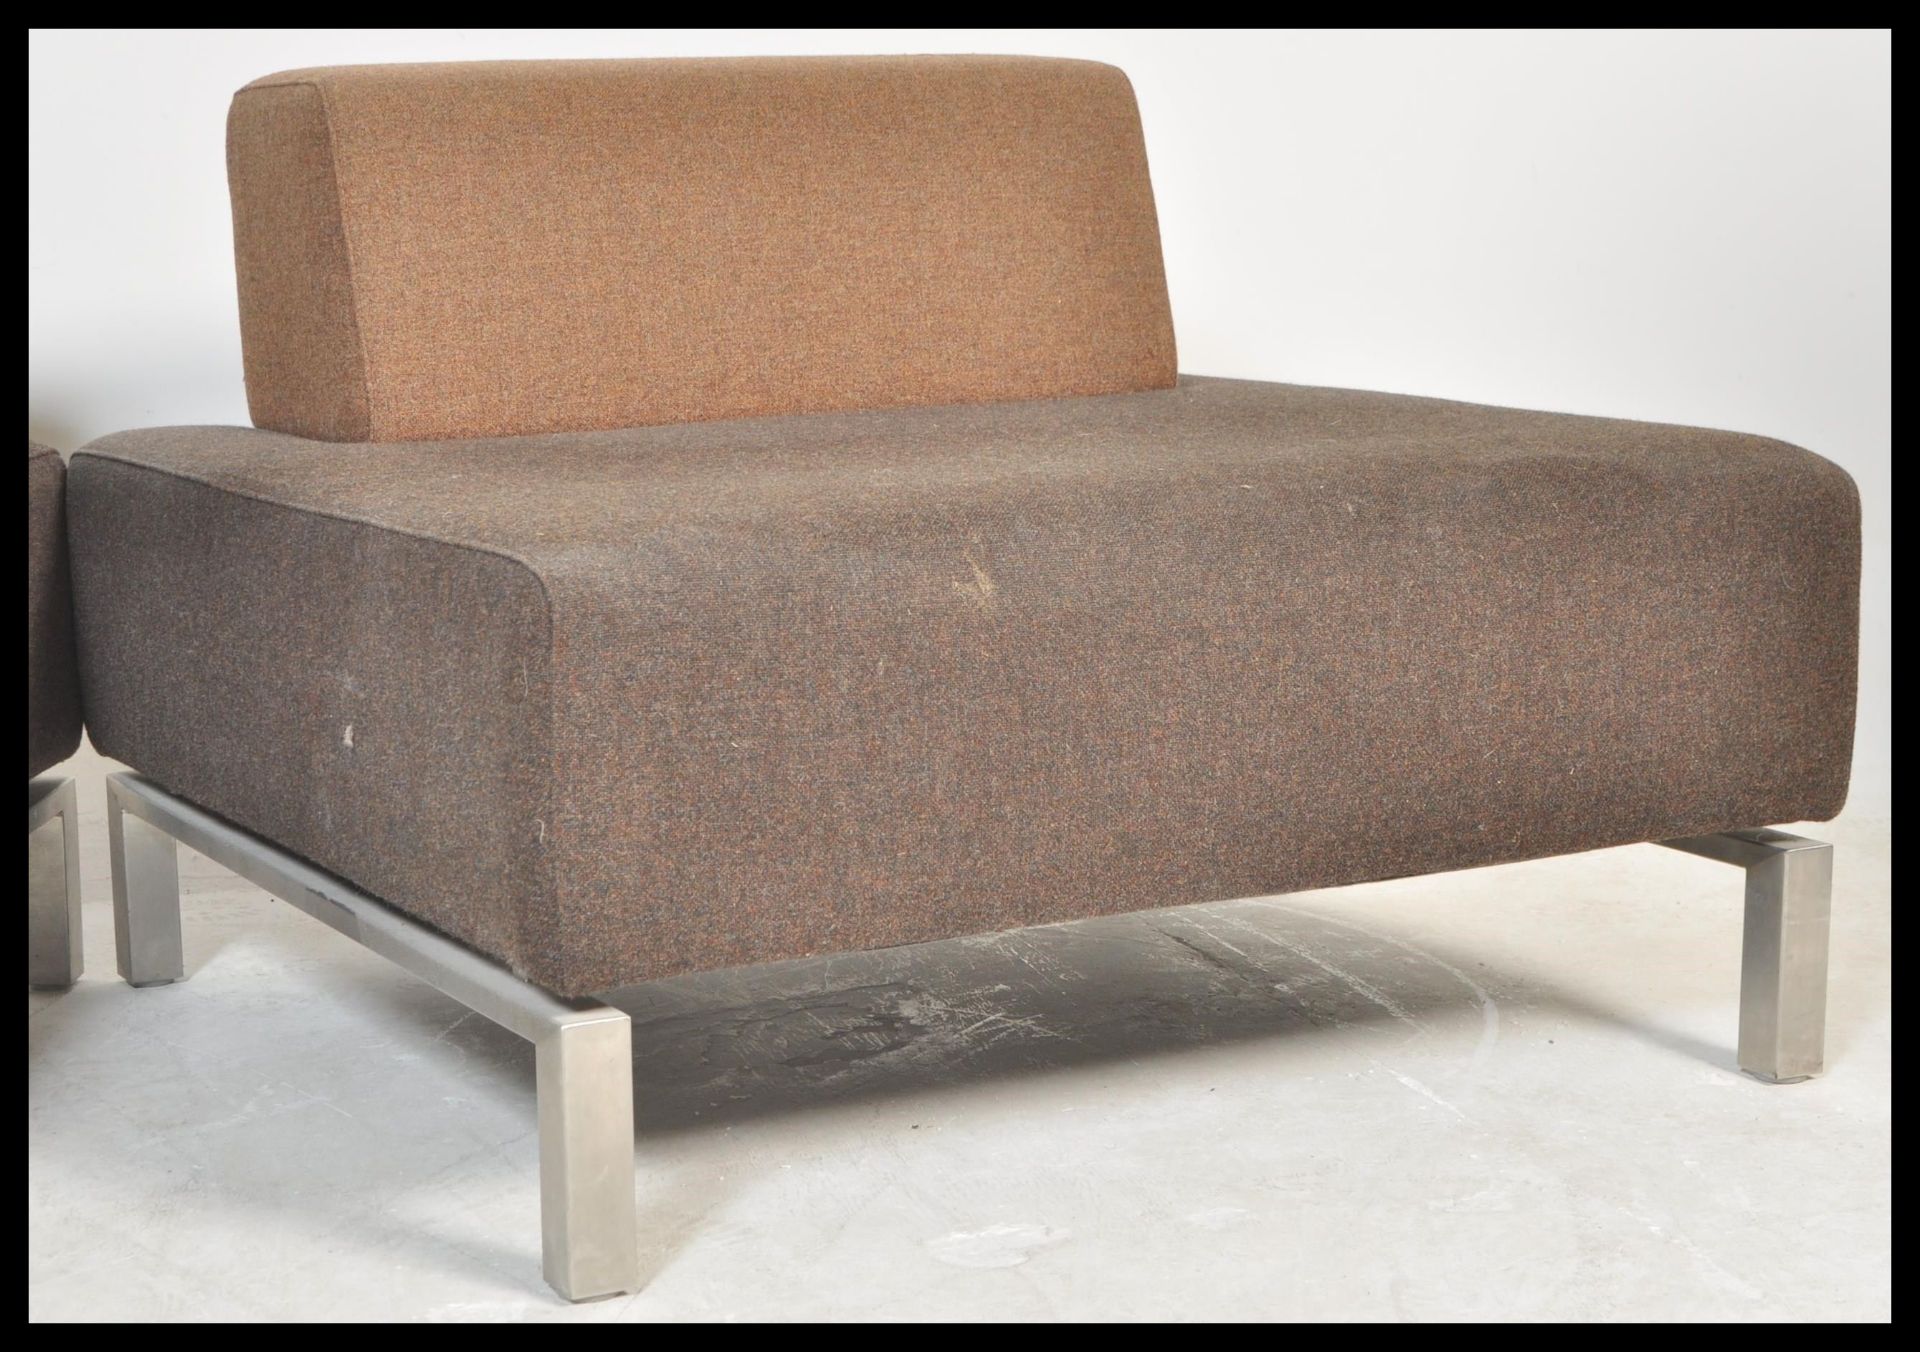 A pair of contemporary modern modular seating sofa / chairs in the manner of Orange Box furniture - Image 3 of 5